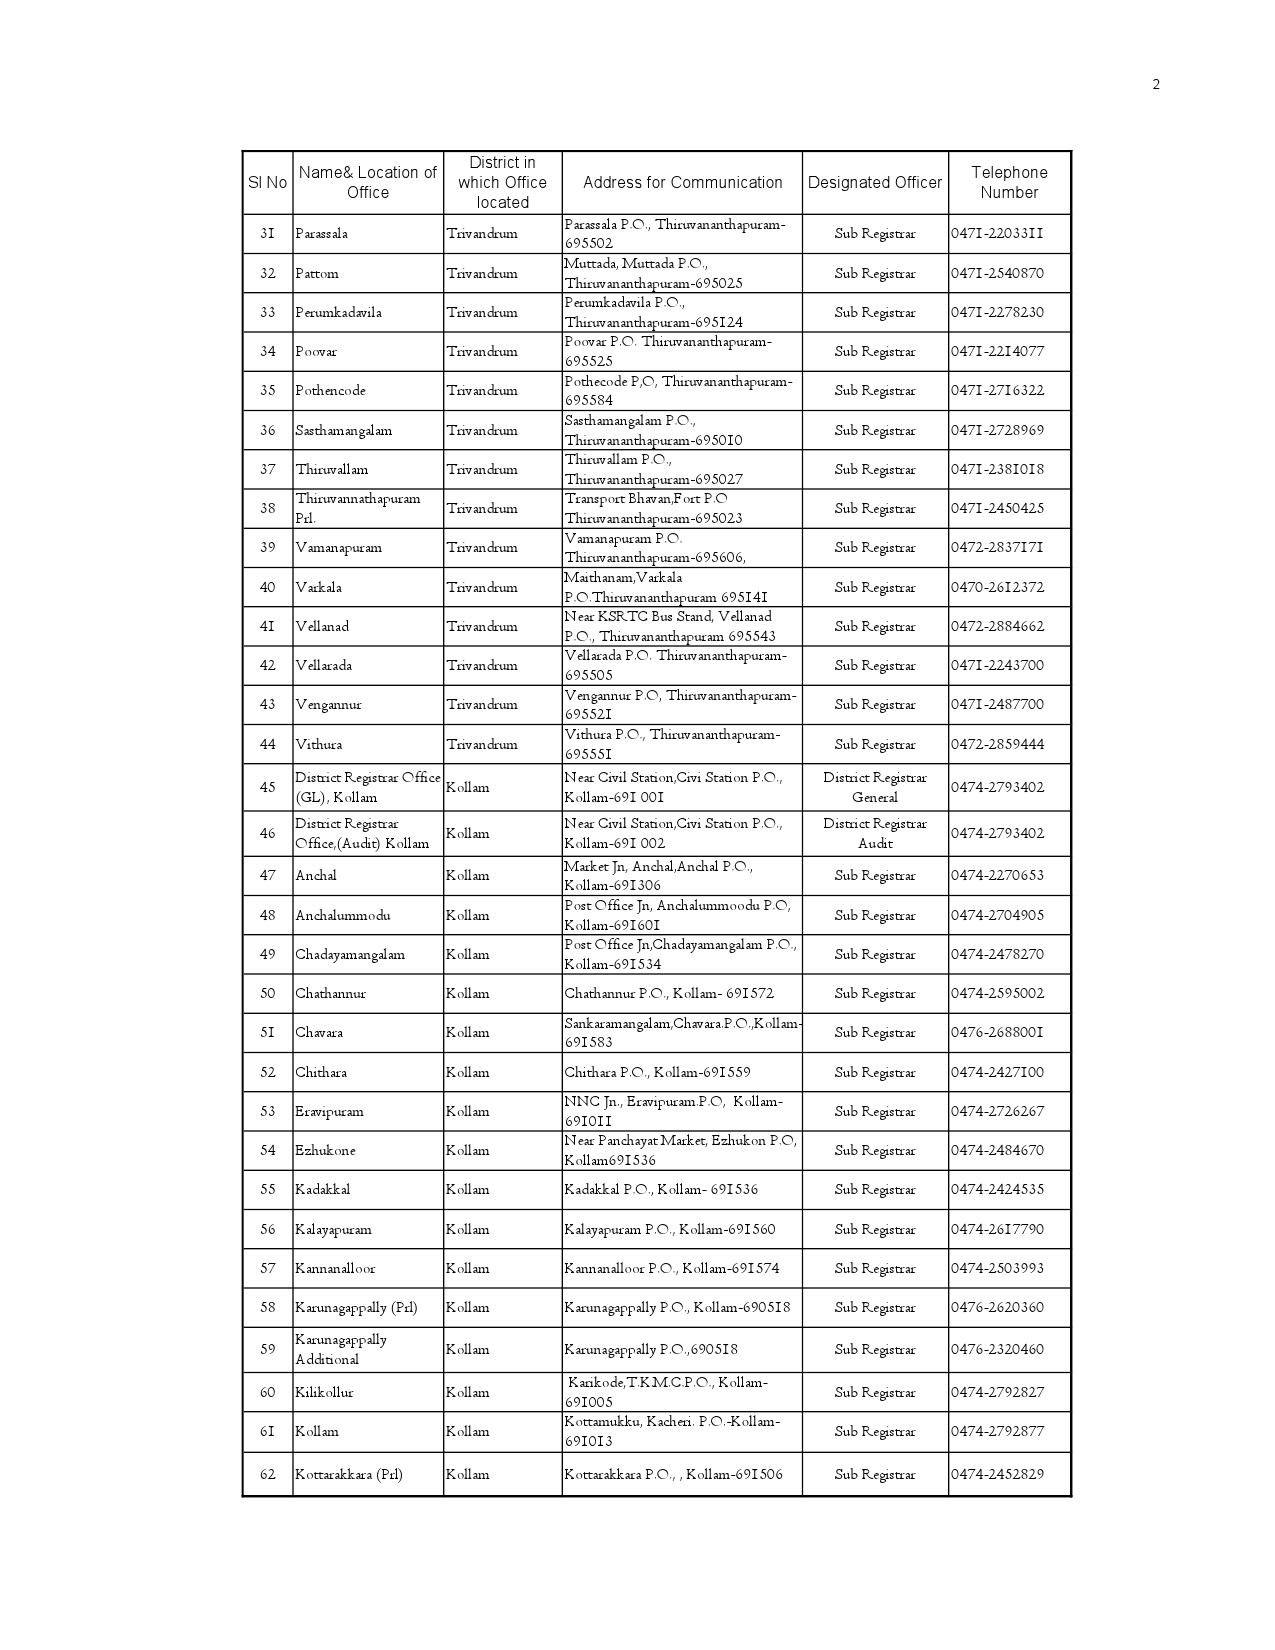 List of Offices in Kerala under the Department of Registration - Notification Image 2